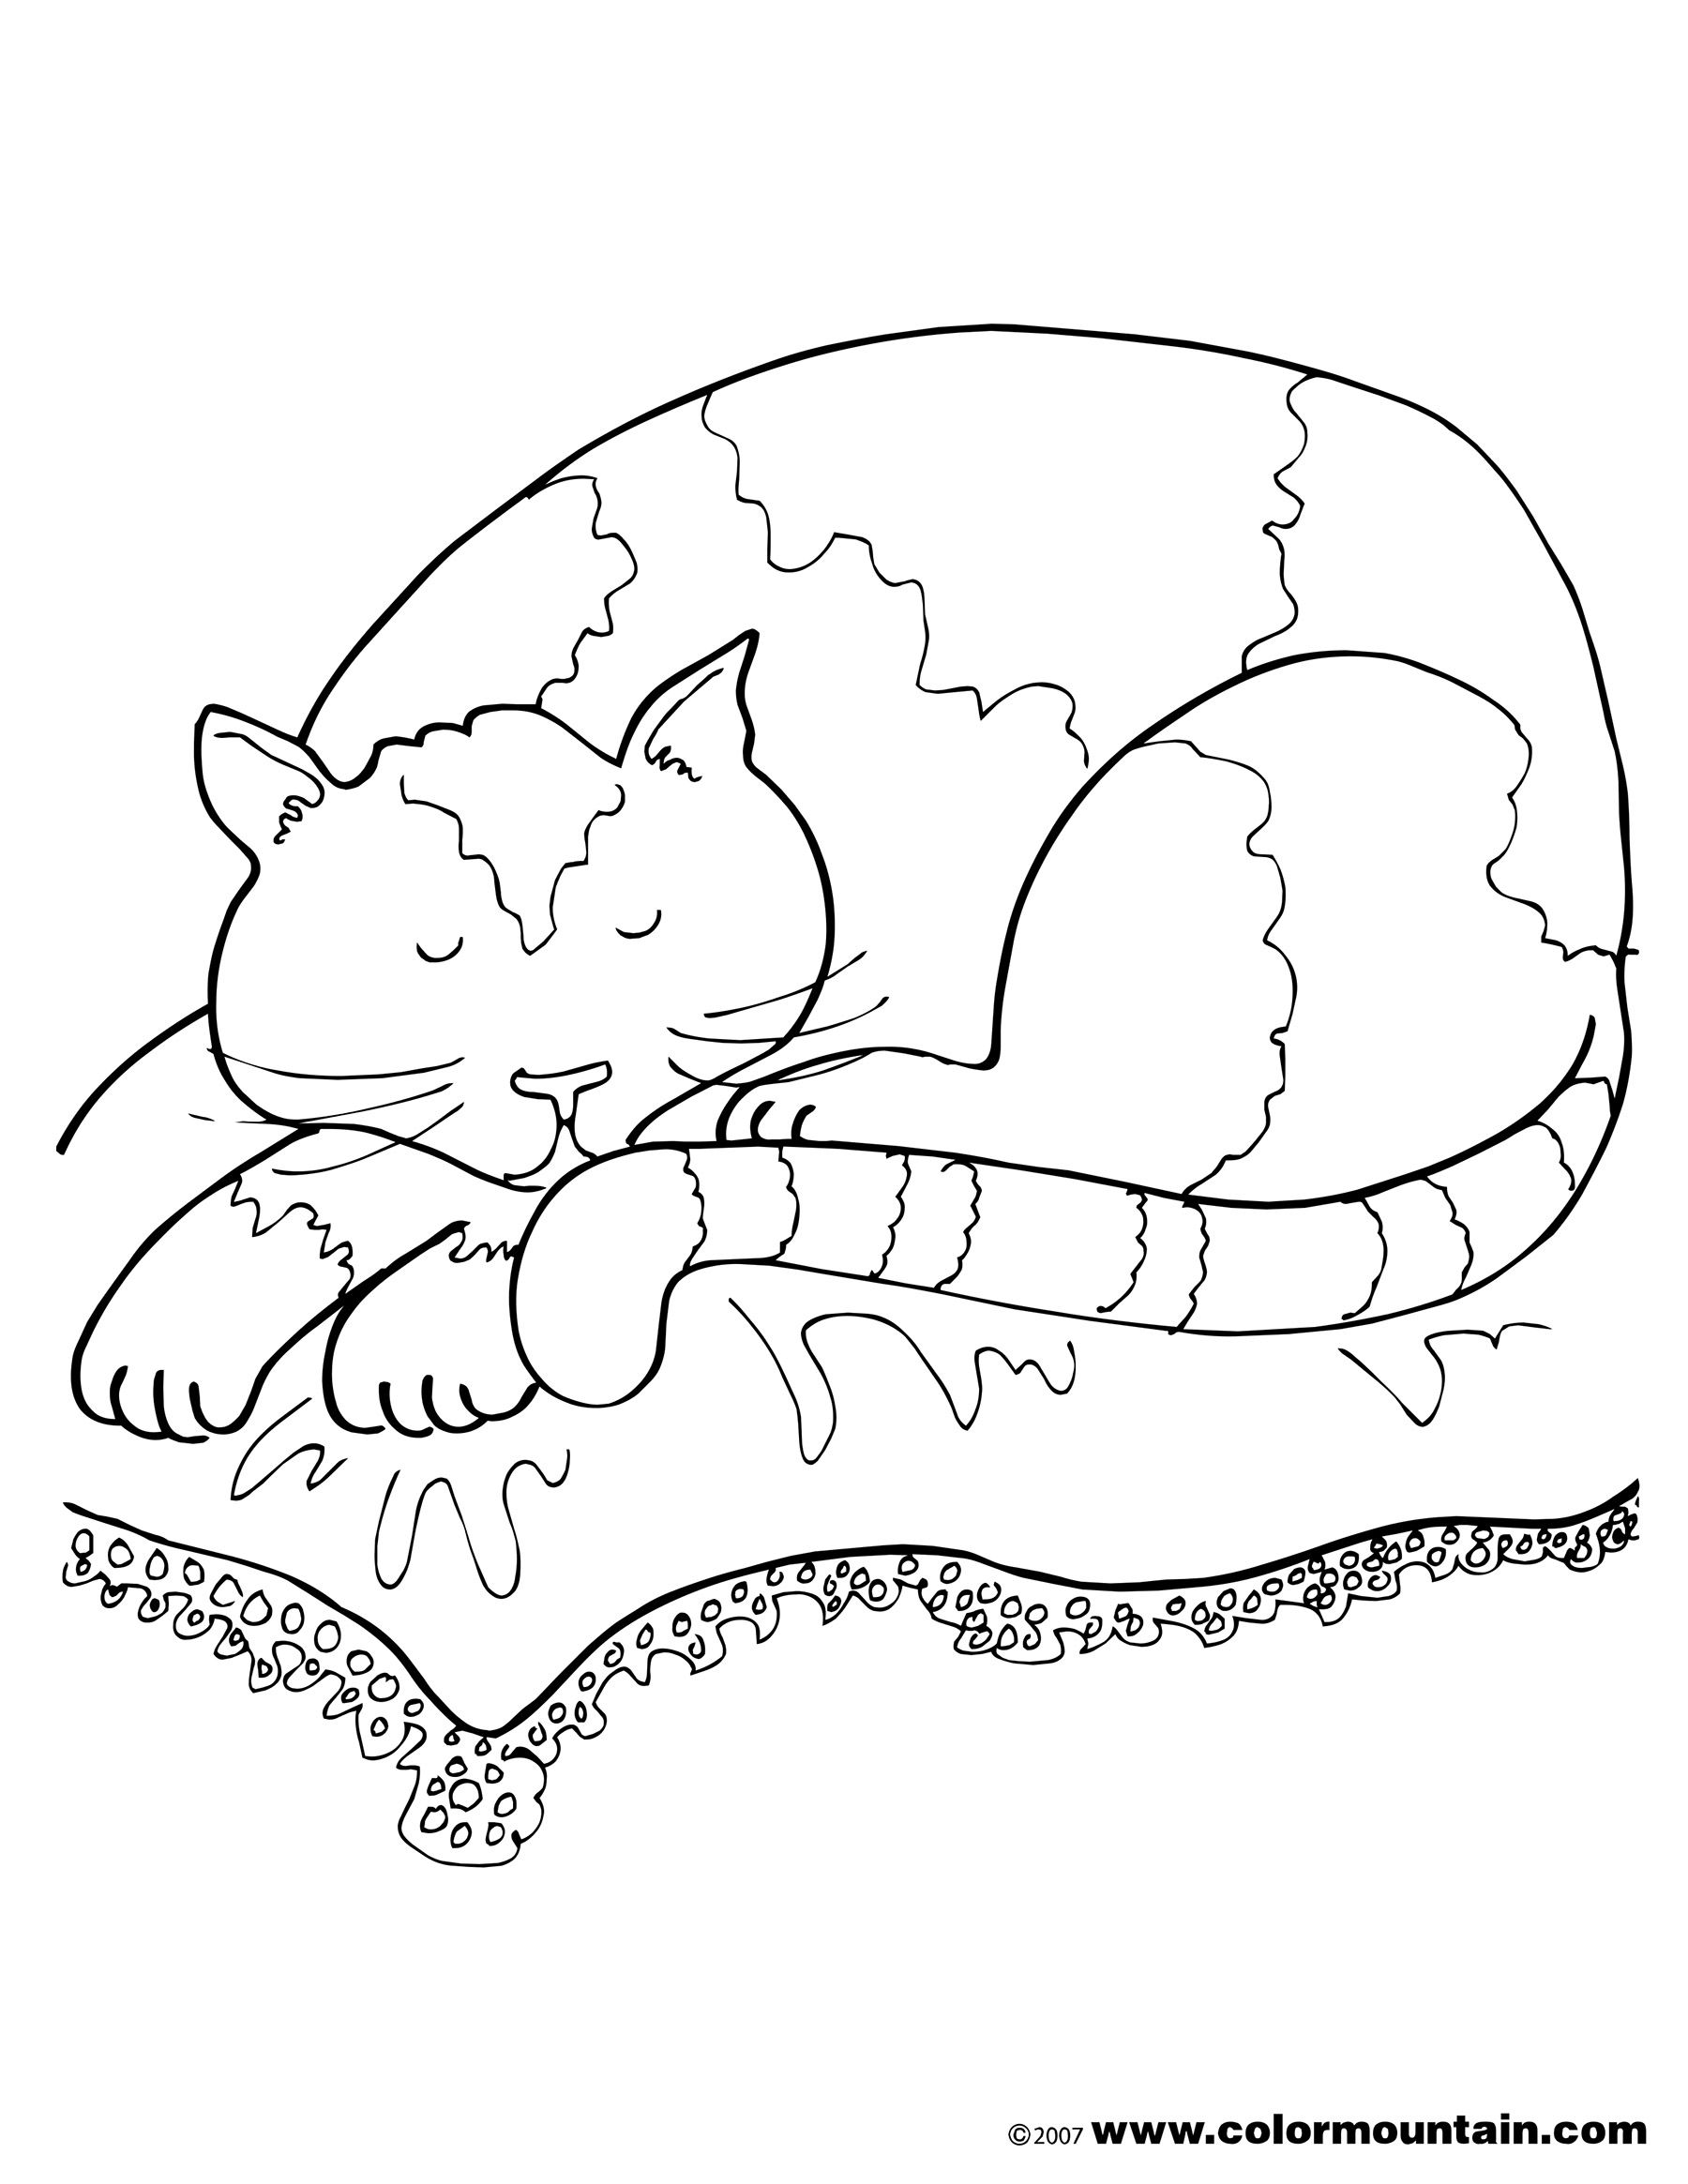 Sleeping Cat Coloring Pages at GetColorings.com | Free printable